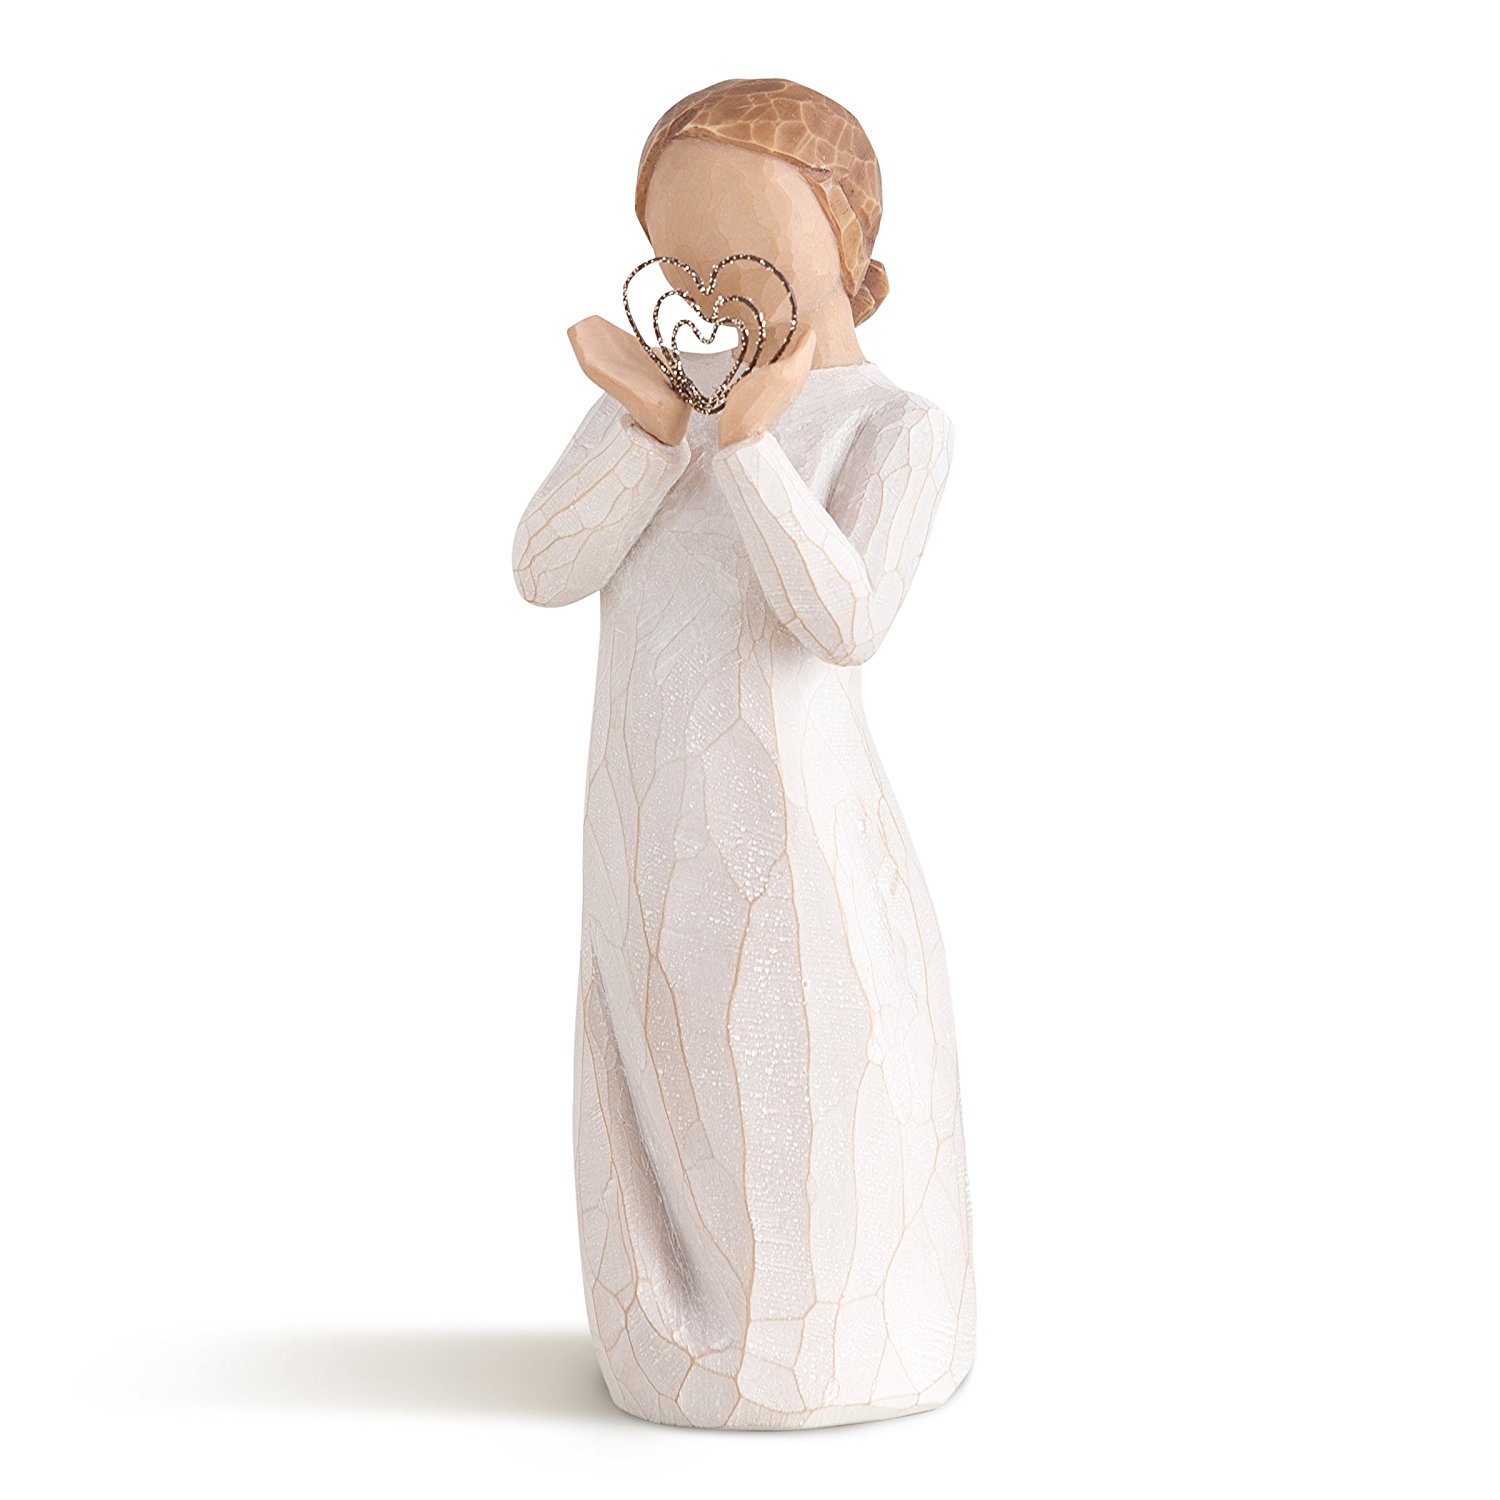 Willow Tree Lots of Love - Girl with Hearts Figurine